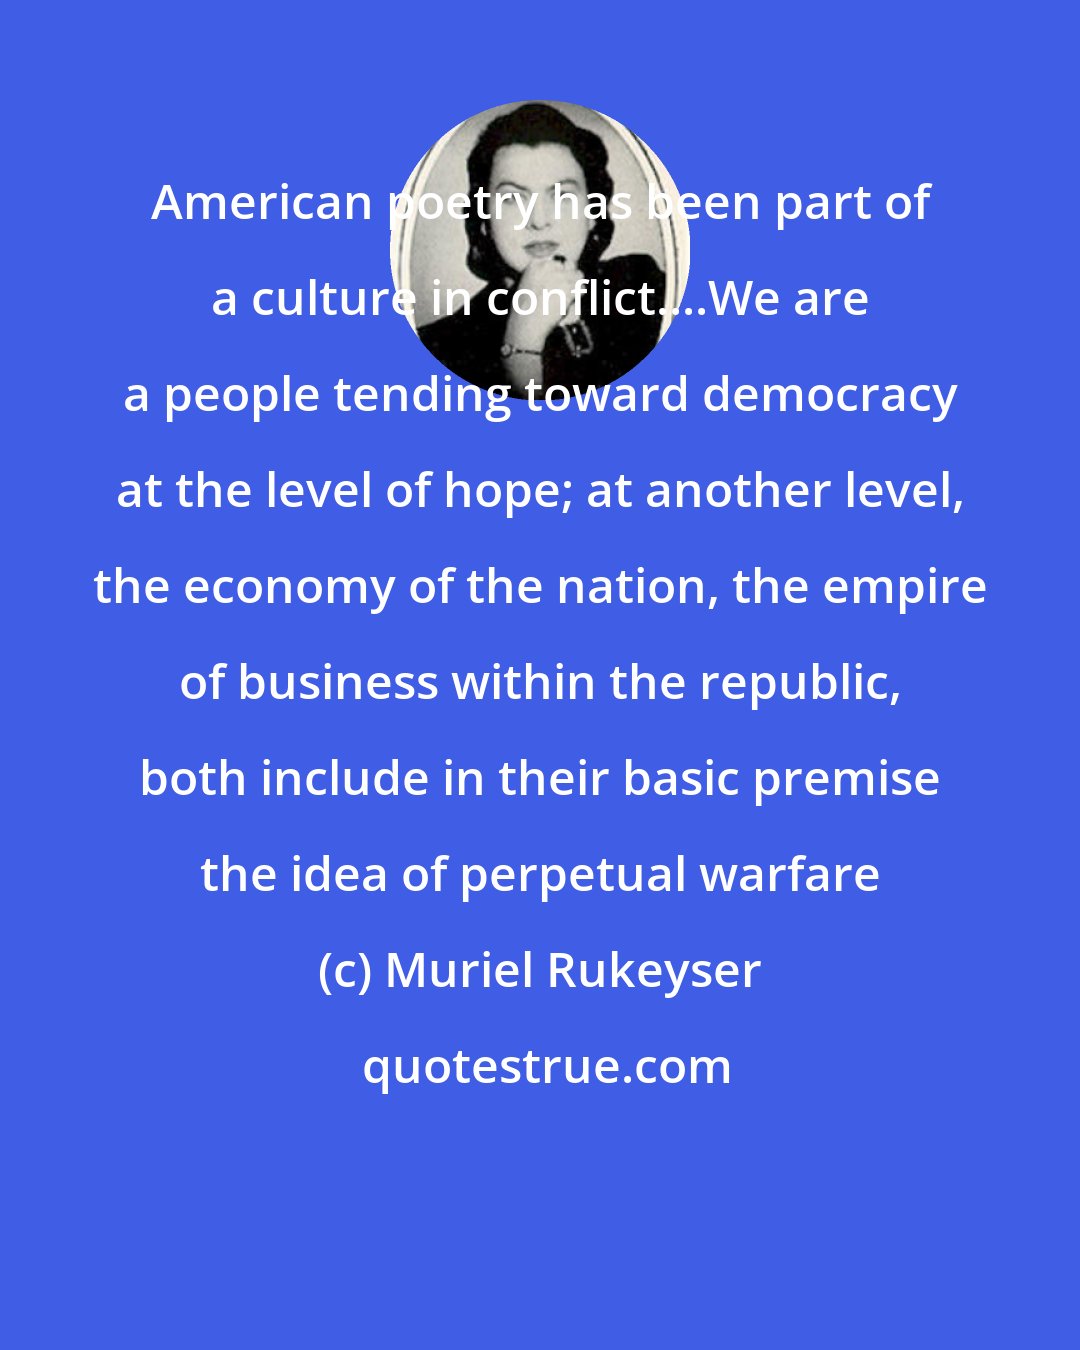 Muriel Rukeyser: American poetry has been part of a culture in conflict....We are a people tending toward democracy at the level of hope; at another level, the economy of the nation, the empire of business within the republic, both include in their basic premise the idea of perpetual warfare